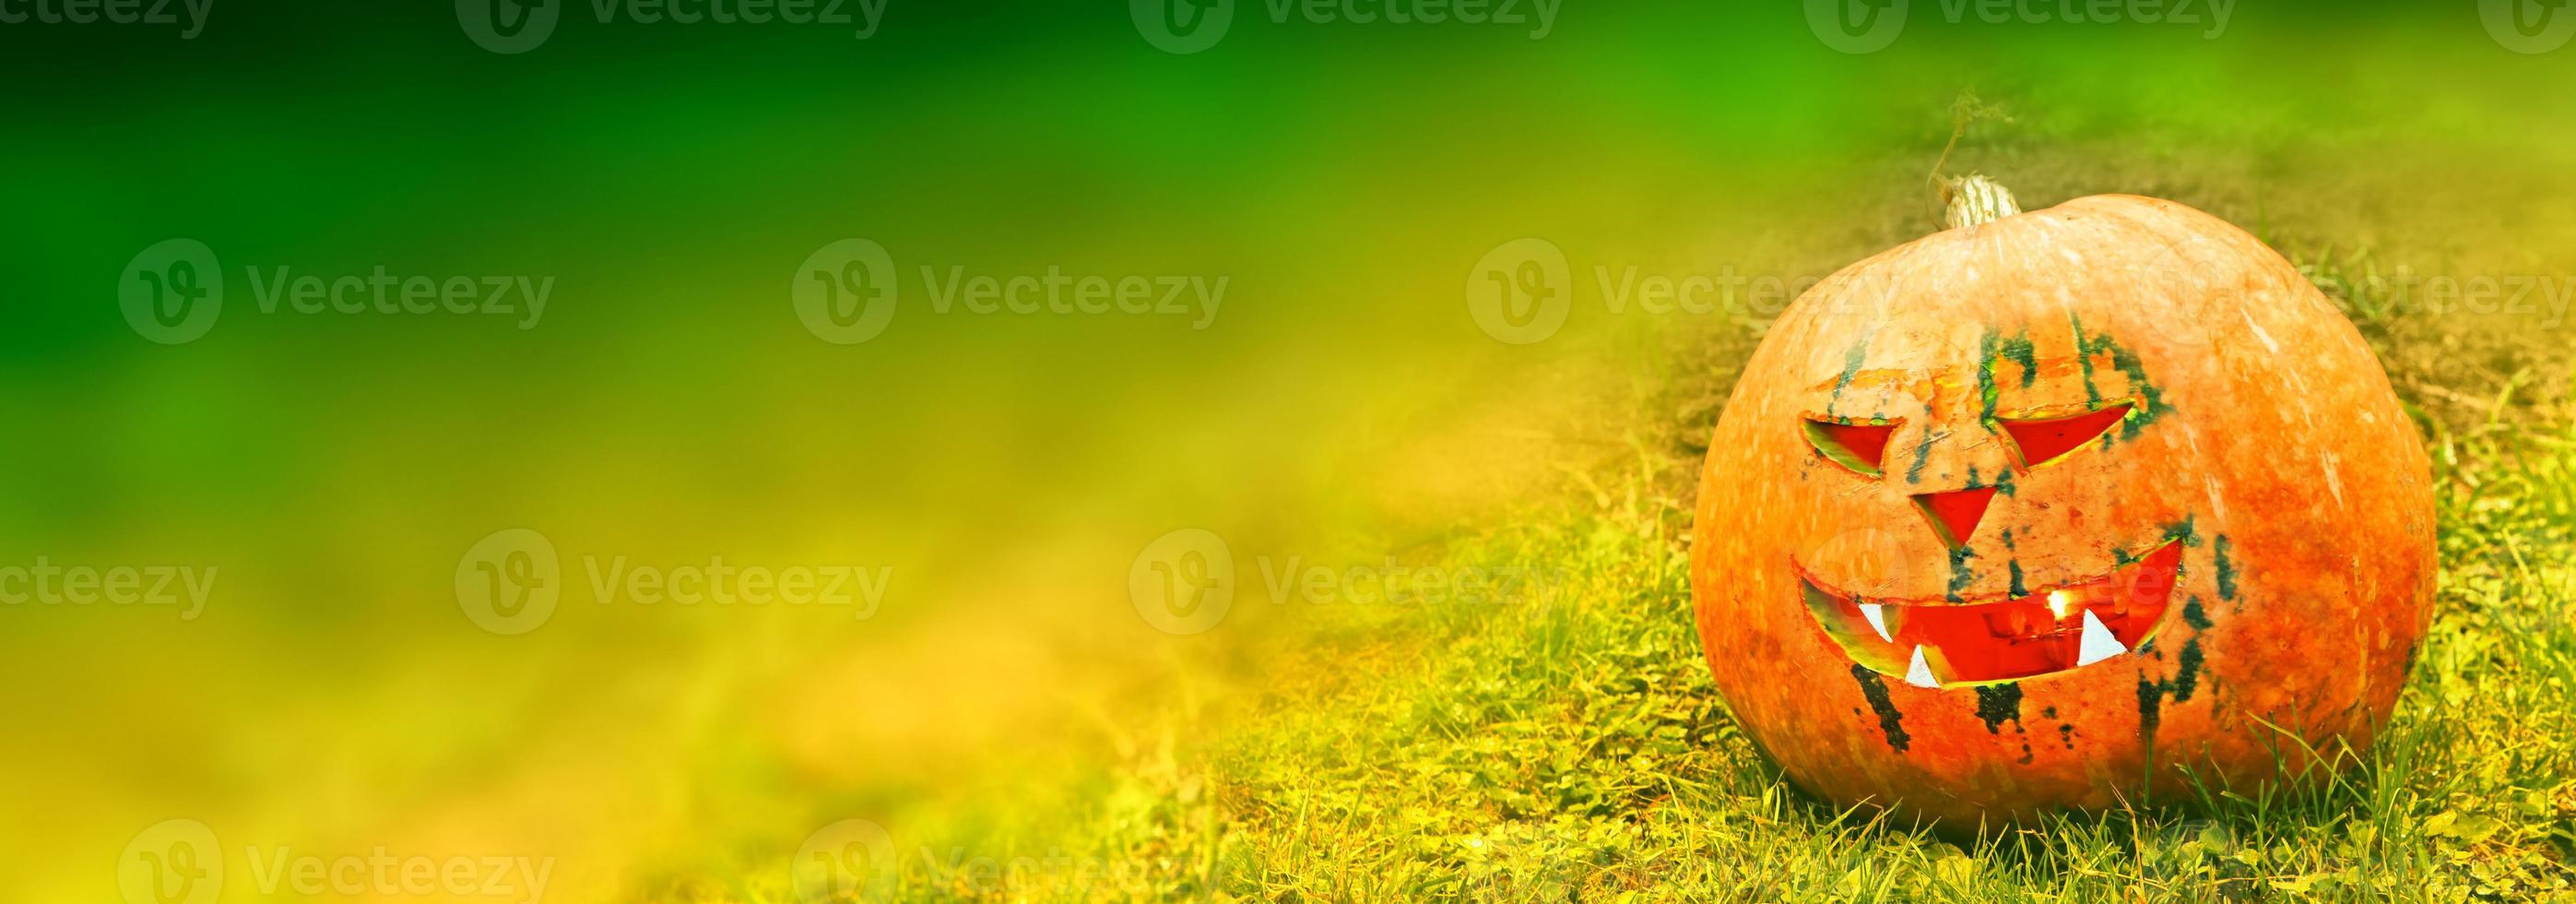 Autumn background of the fruits of a bright orange pumpkin. photo